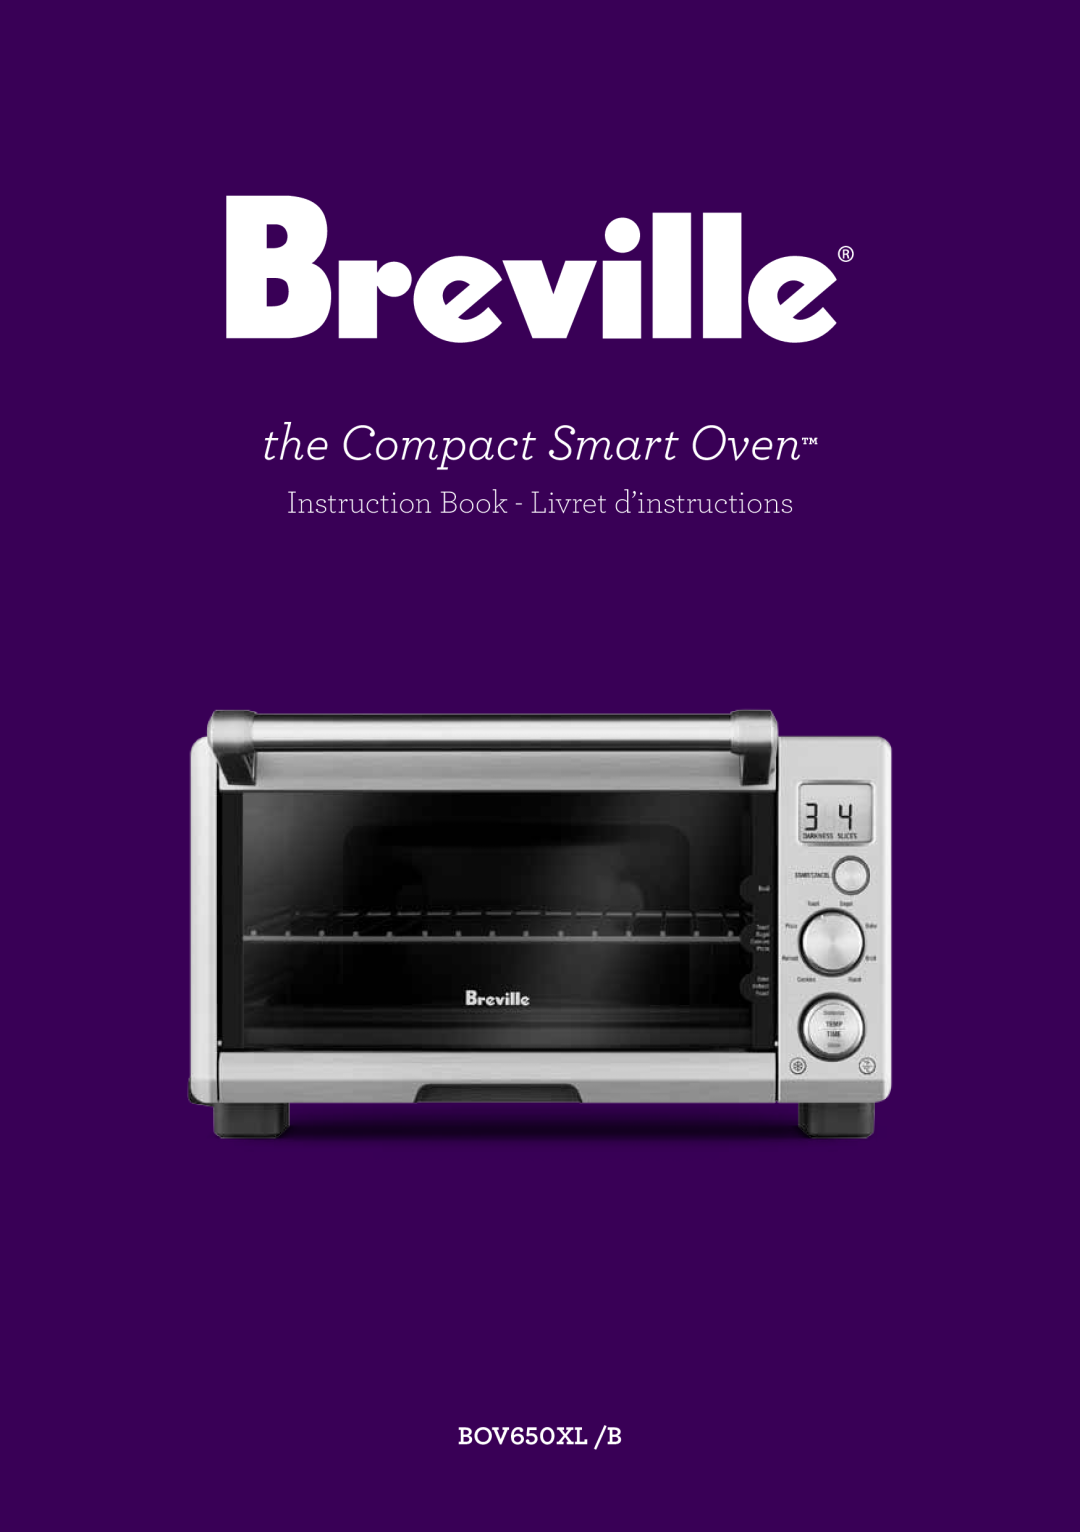 Breville BOV650XL /B Issue - F11 manual the Compact Smart Oven, Instruction Book - Livret d’instructions 